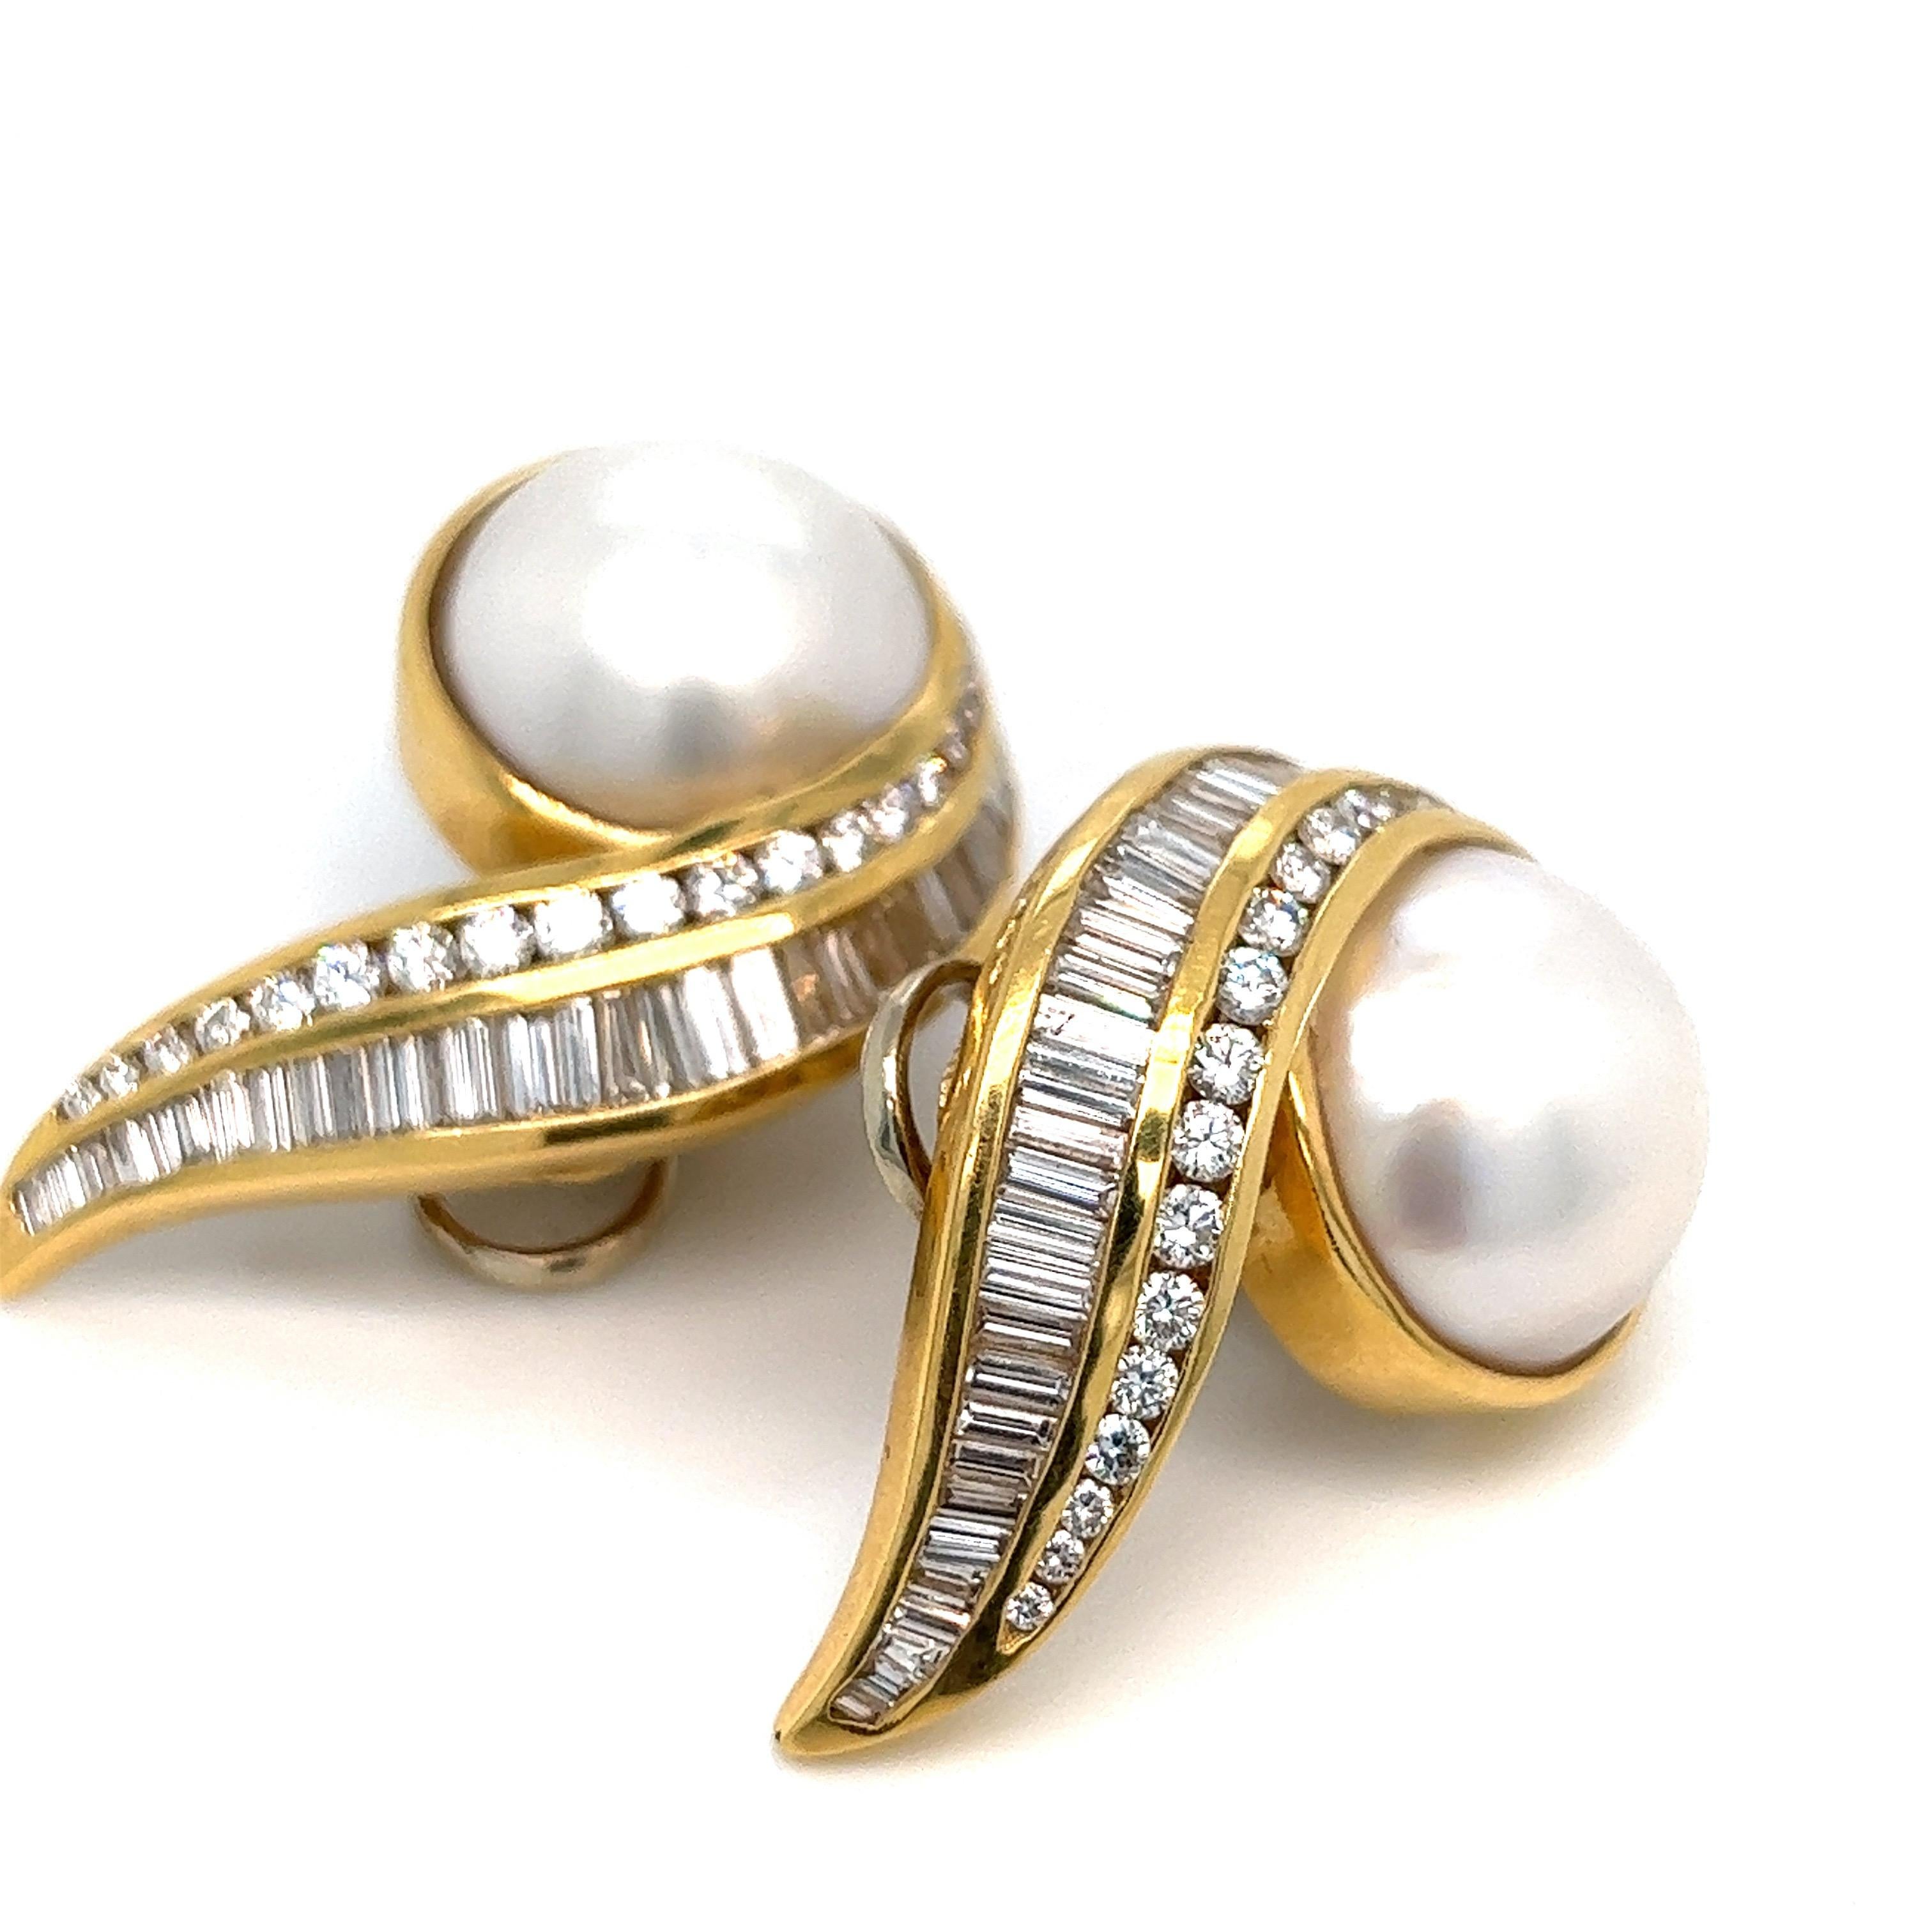 Baguette Cut Charles Krypell Mabé Pearls Diamond Gold Ear Clips For Sale